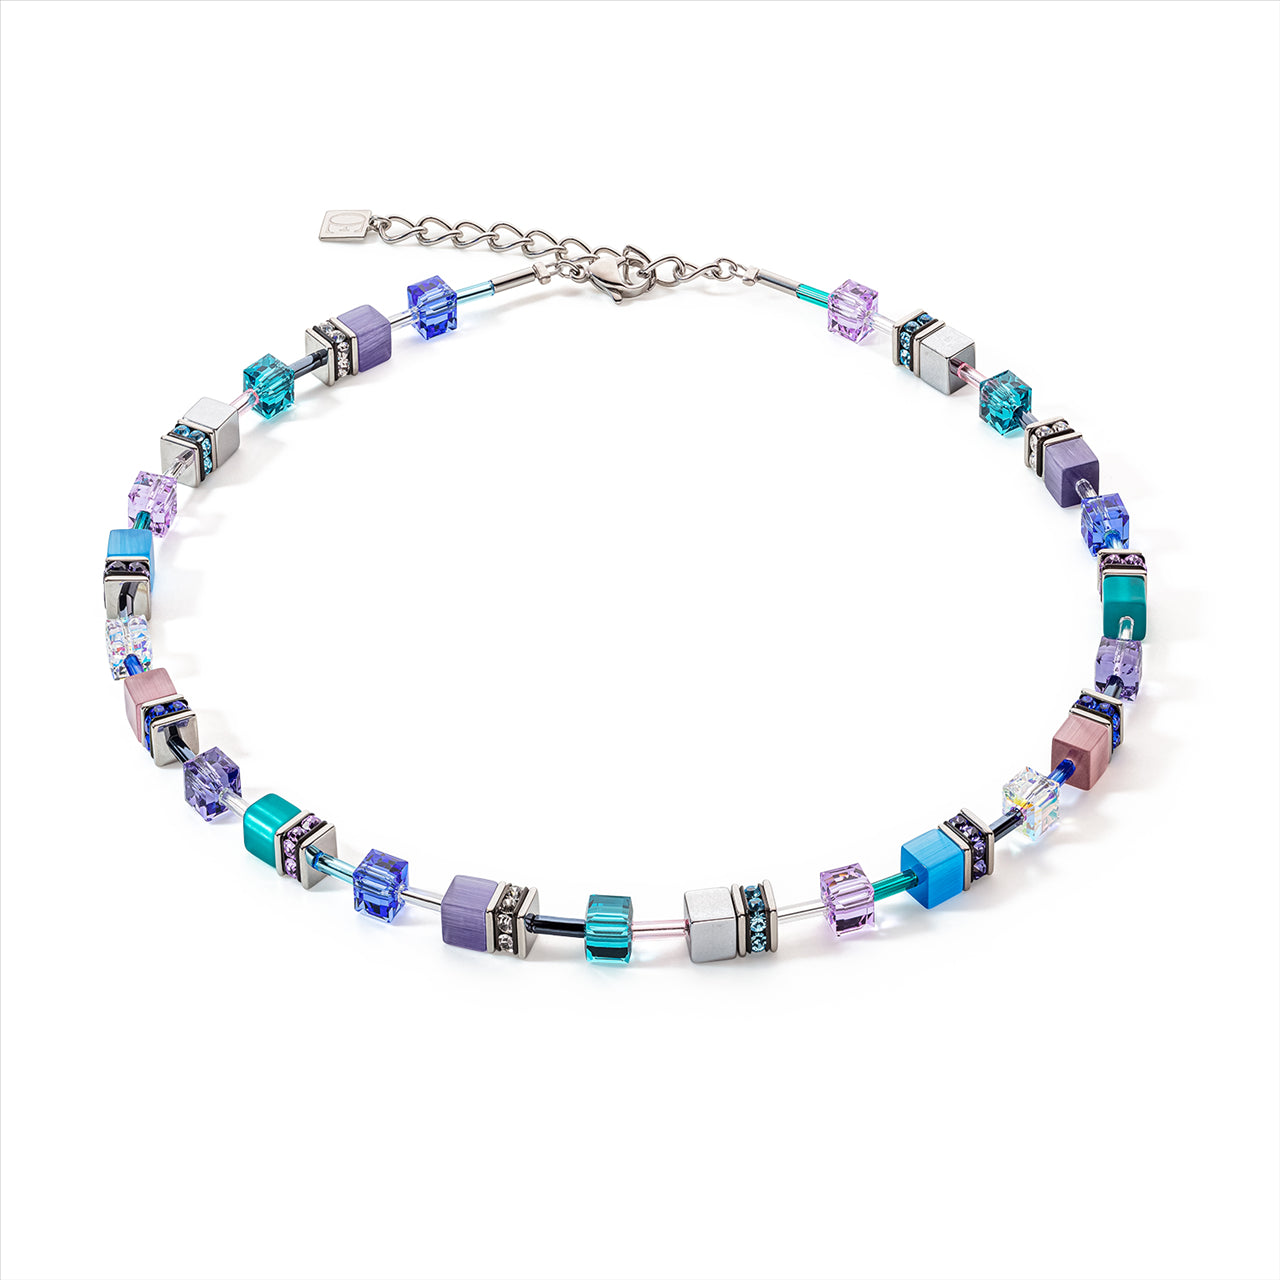 Coeur De Lion - - Necklace, St/St Geo-Cube In Turquoise & Purple With Titanium Oxide Hematite/Synthetic Tiger Eye/Polaris/Rhinestone Rondelles/Glass & European Crystals